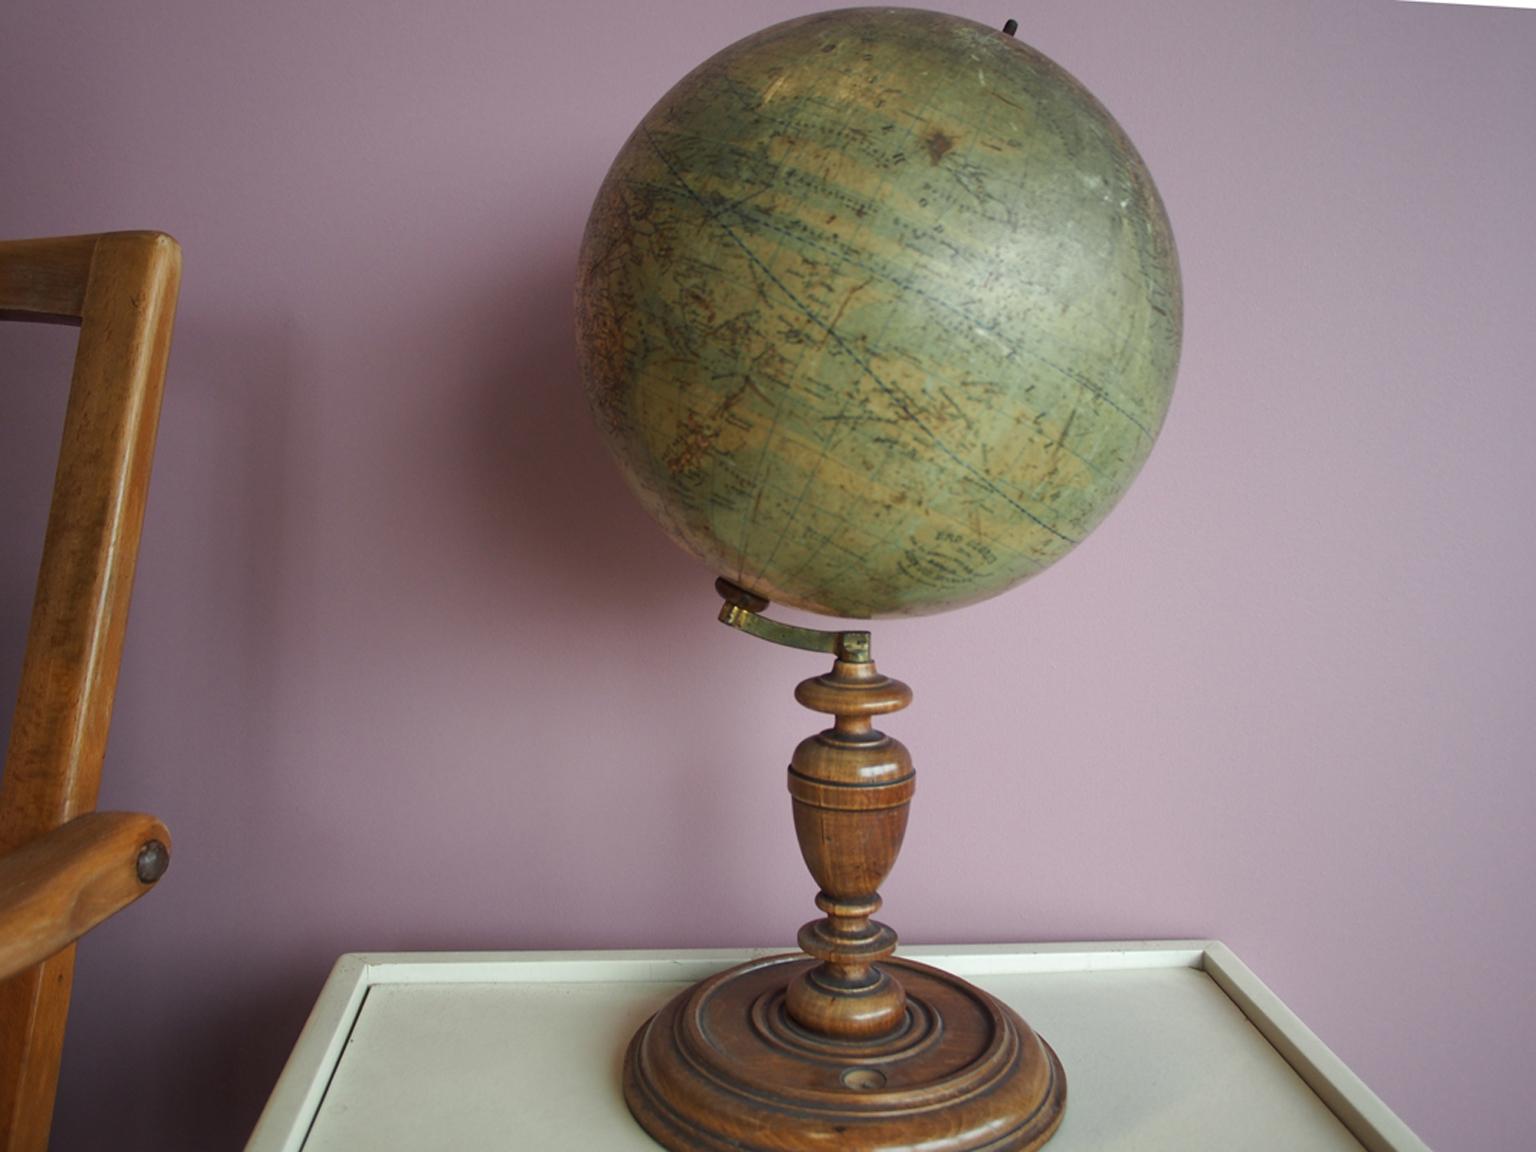 A beautiful, small earth globe with compass.

Ludwig Julius Heymann, former bookseller from Breslau moved to Berlin in 1861 and started 1883 under the company name 